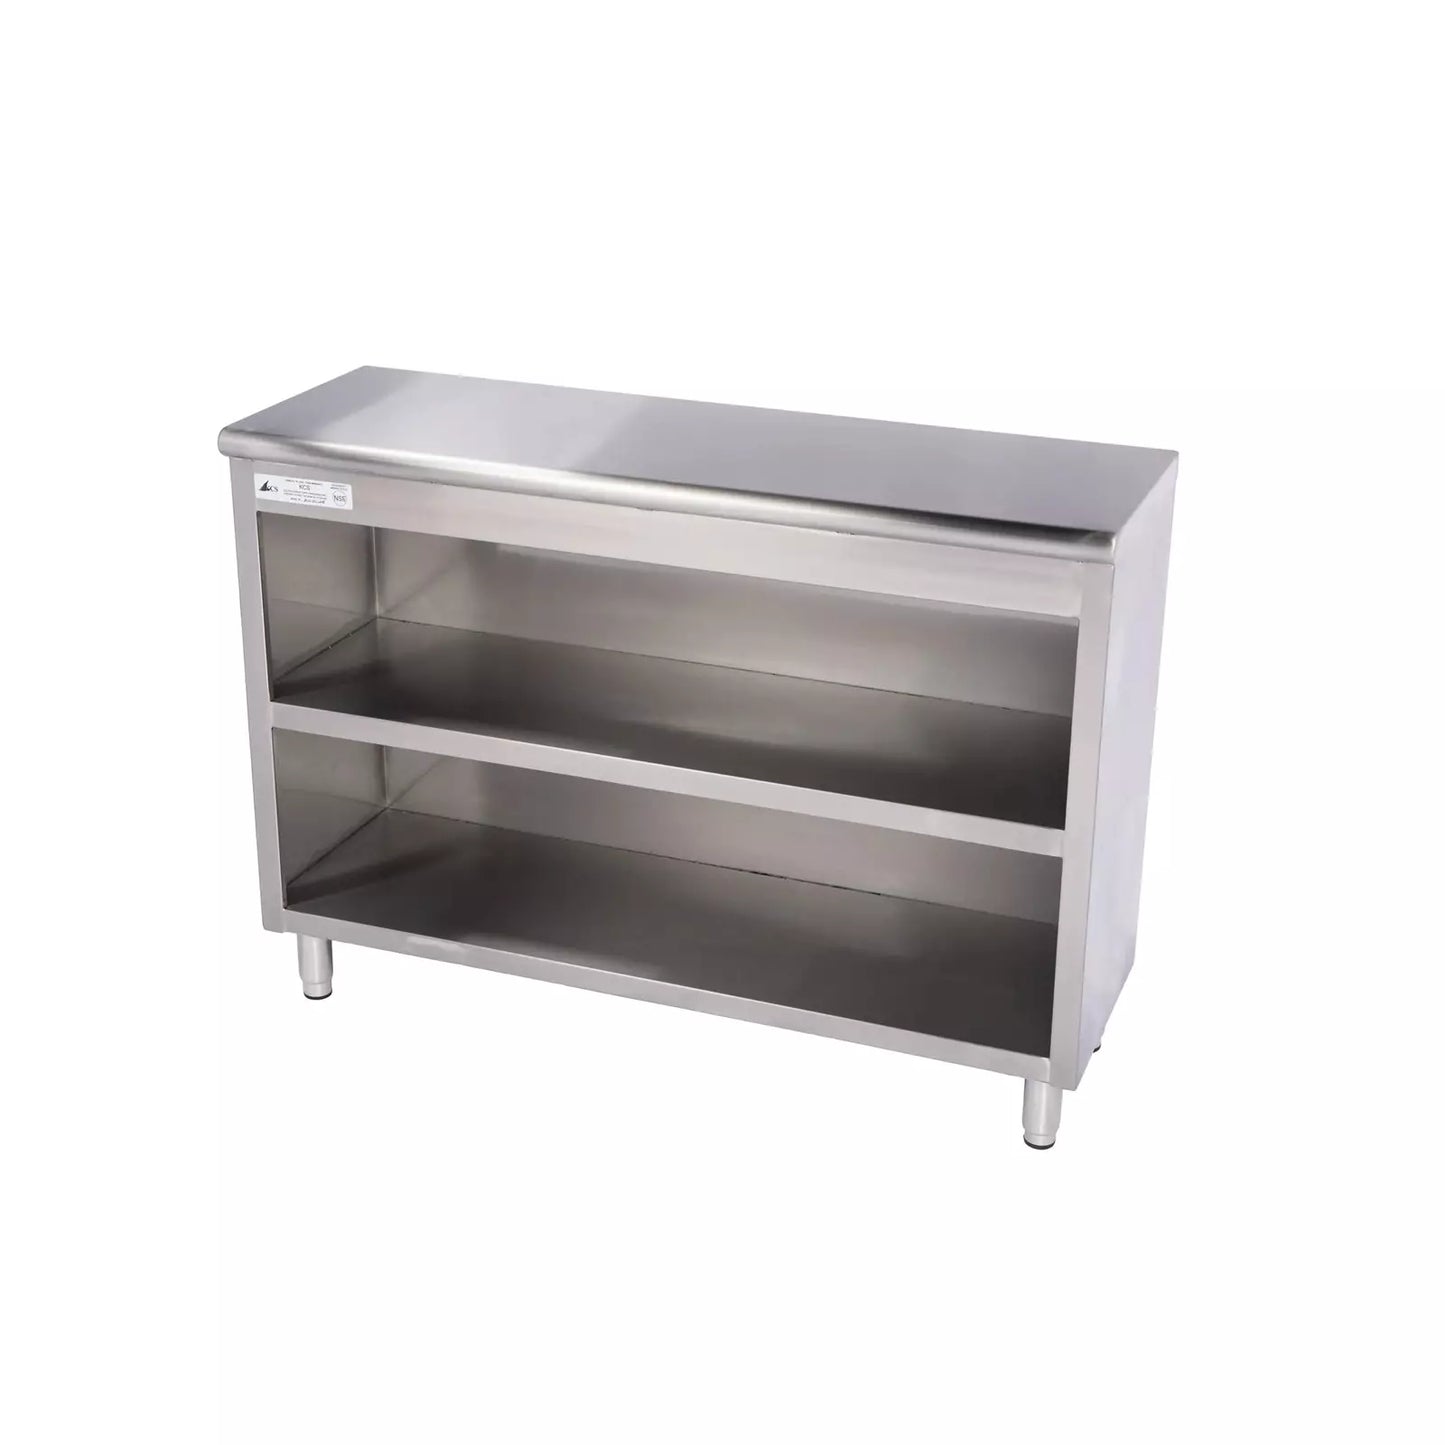 KCS DS-1636 36" Wide Stainless Steel Open Front Storage Dish Cabinet